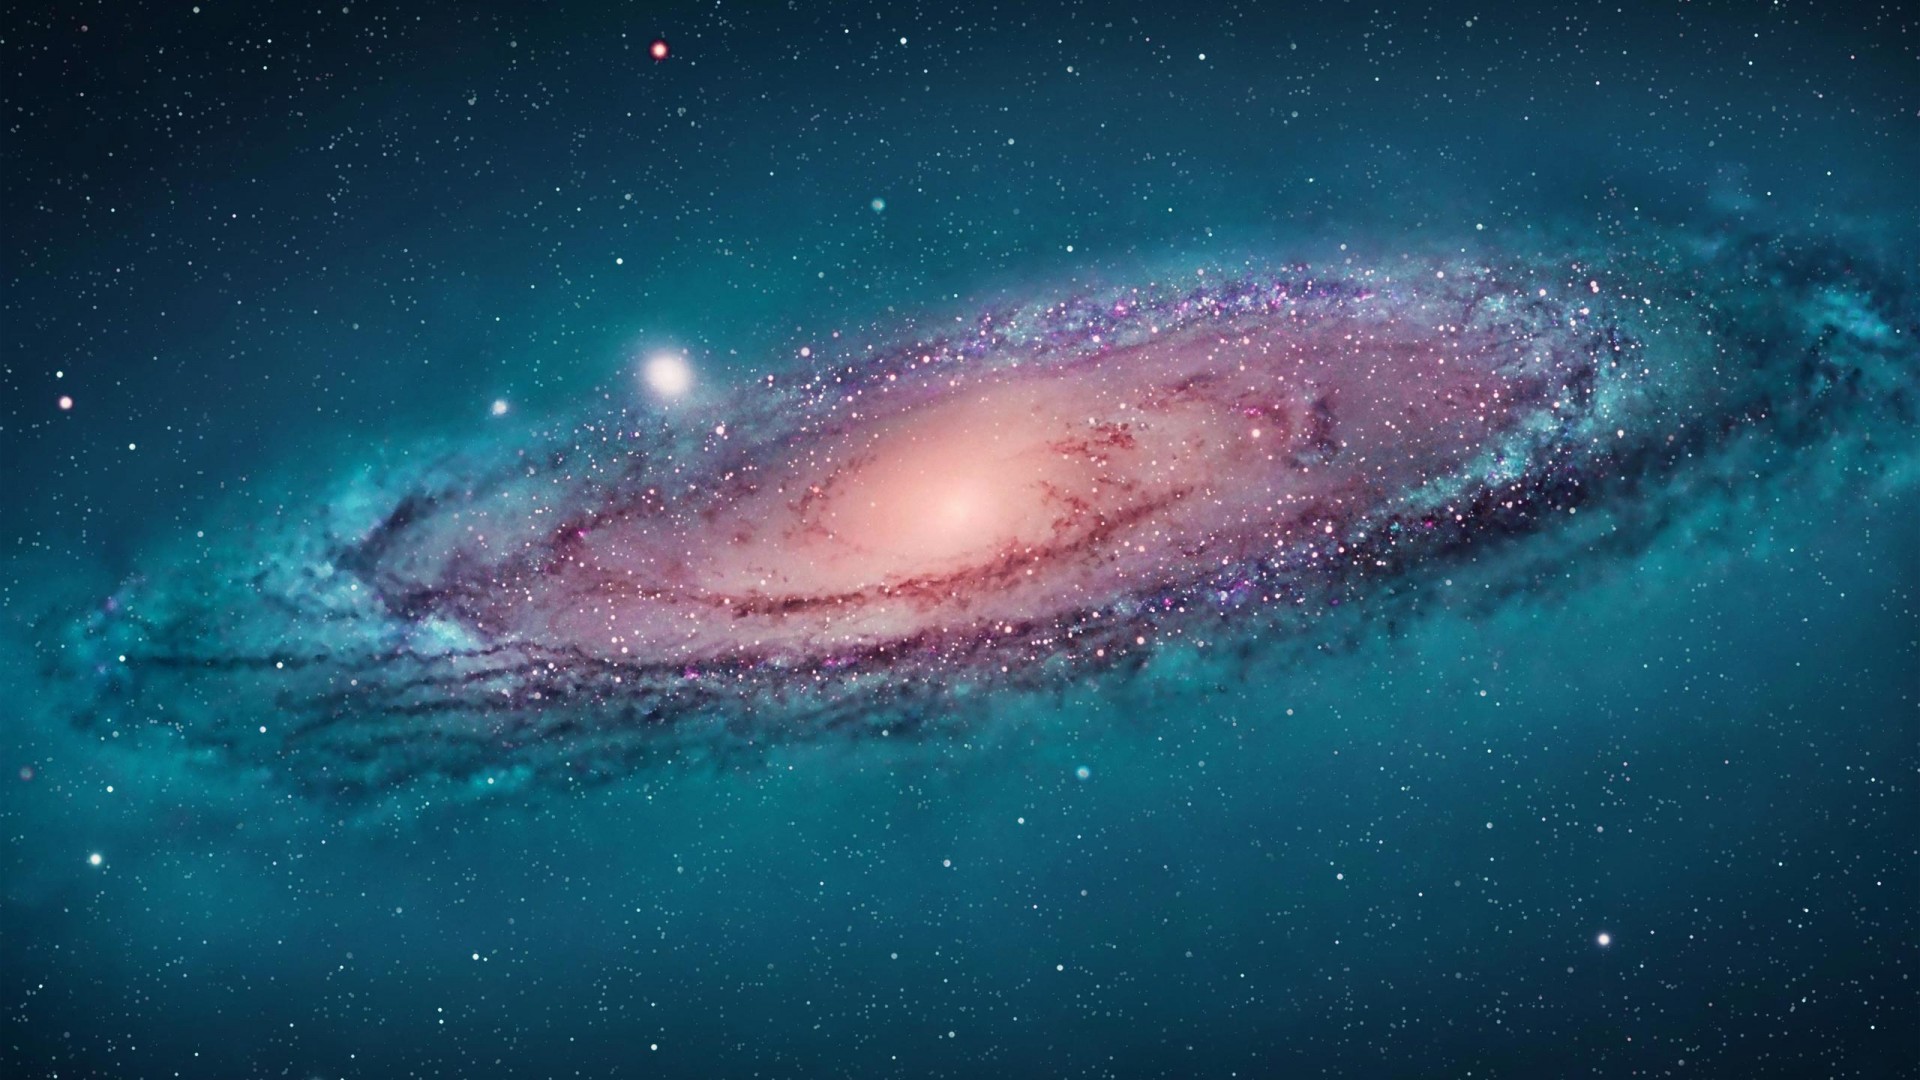 500 Andromeda Galaxy Pictures HD  Download Free Images on Unsplash